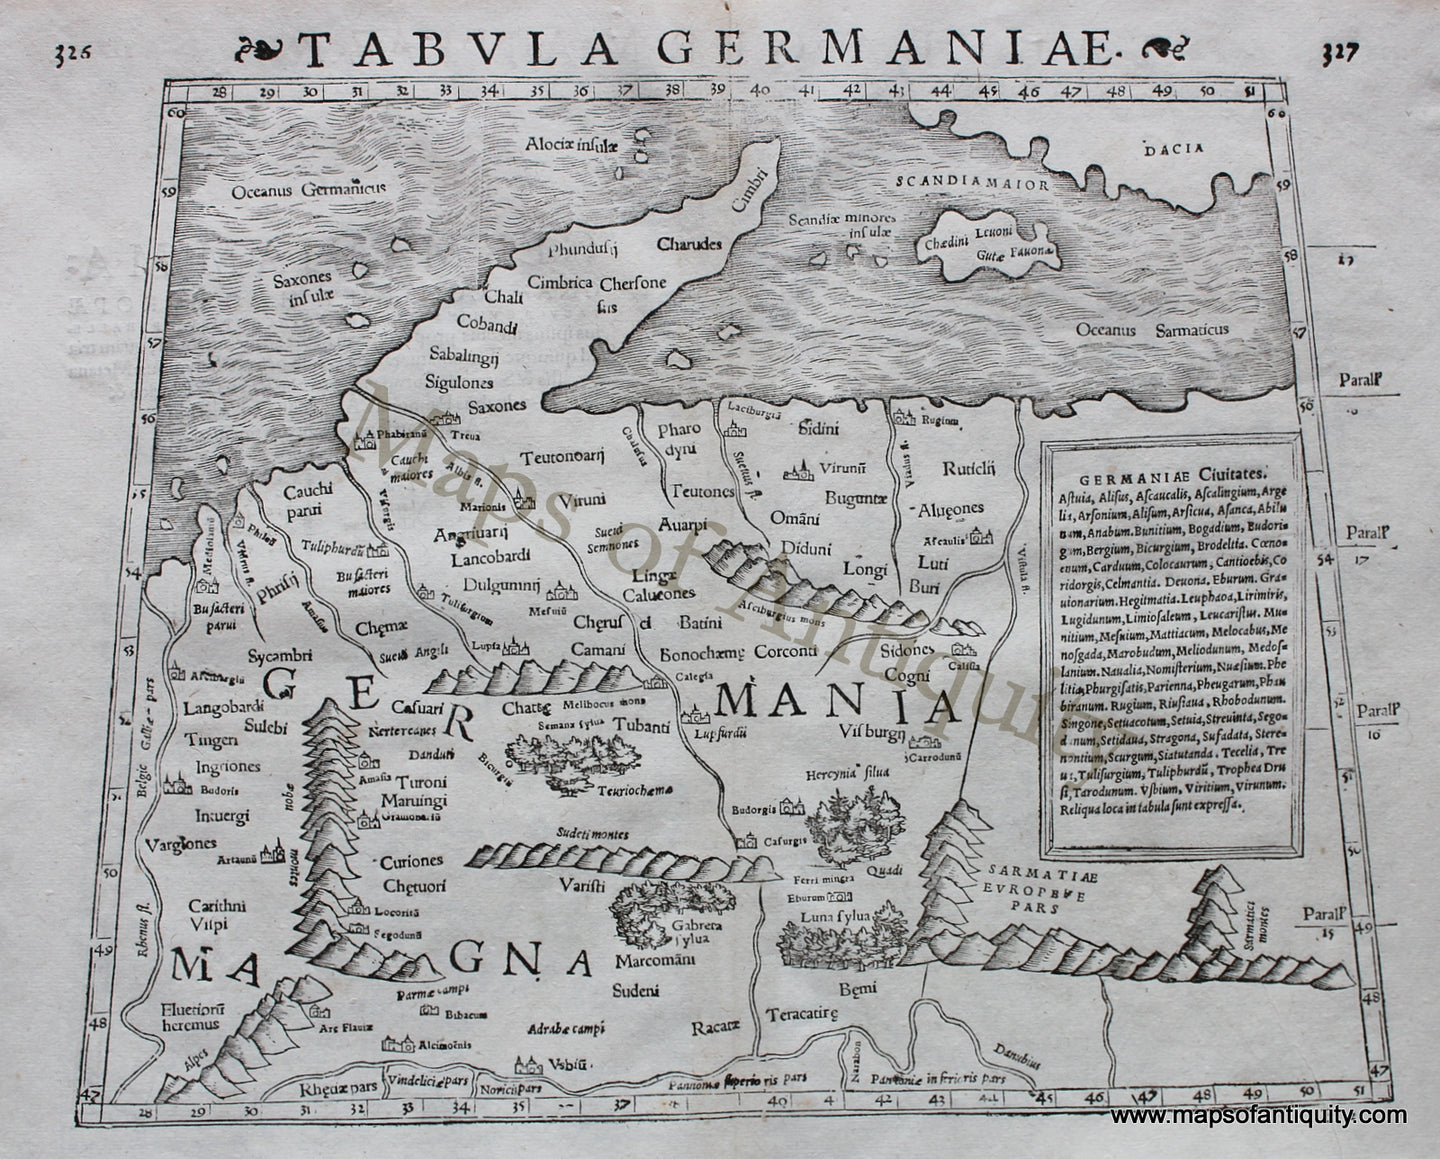 Antique-Black-and-White-Engraved-Map-Tabula-Germaniae-Germany-Europe-Germany-1542-Munster-Maps-Of-Antiquity